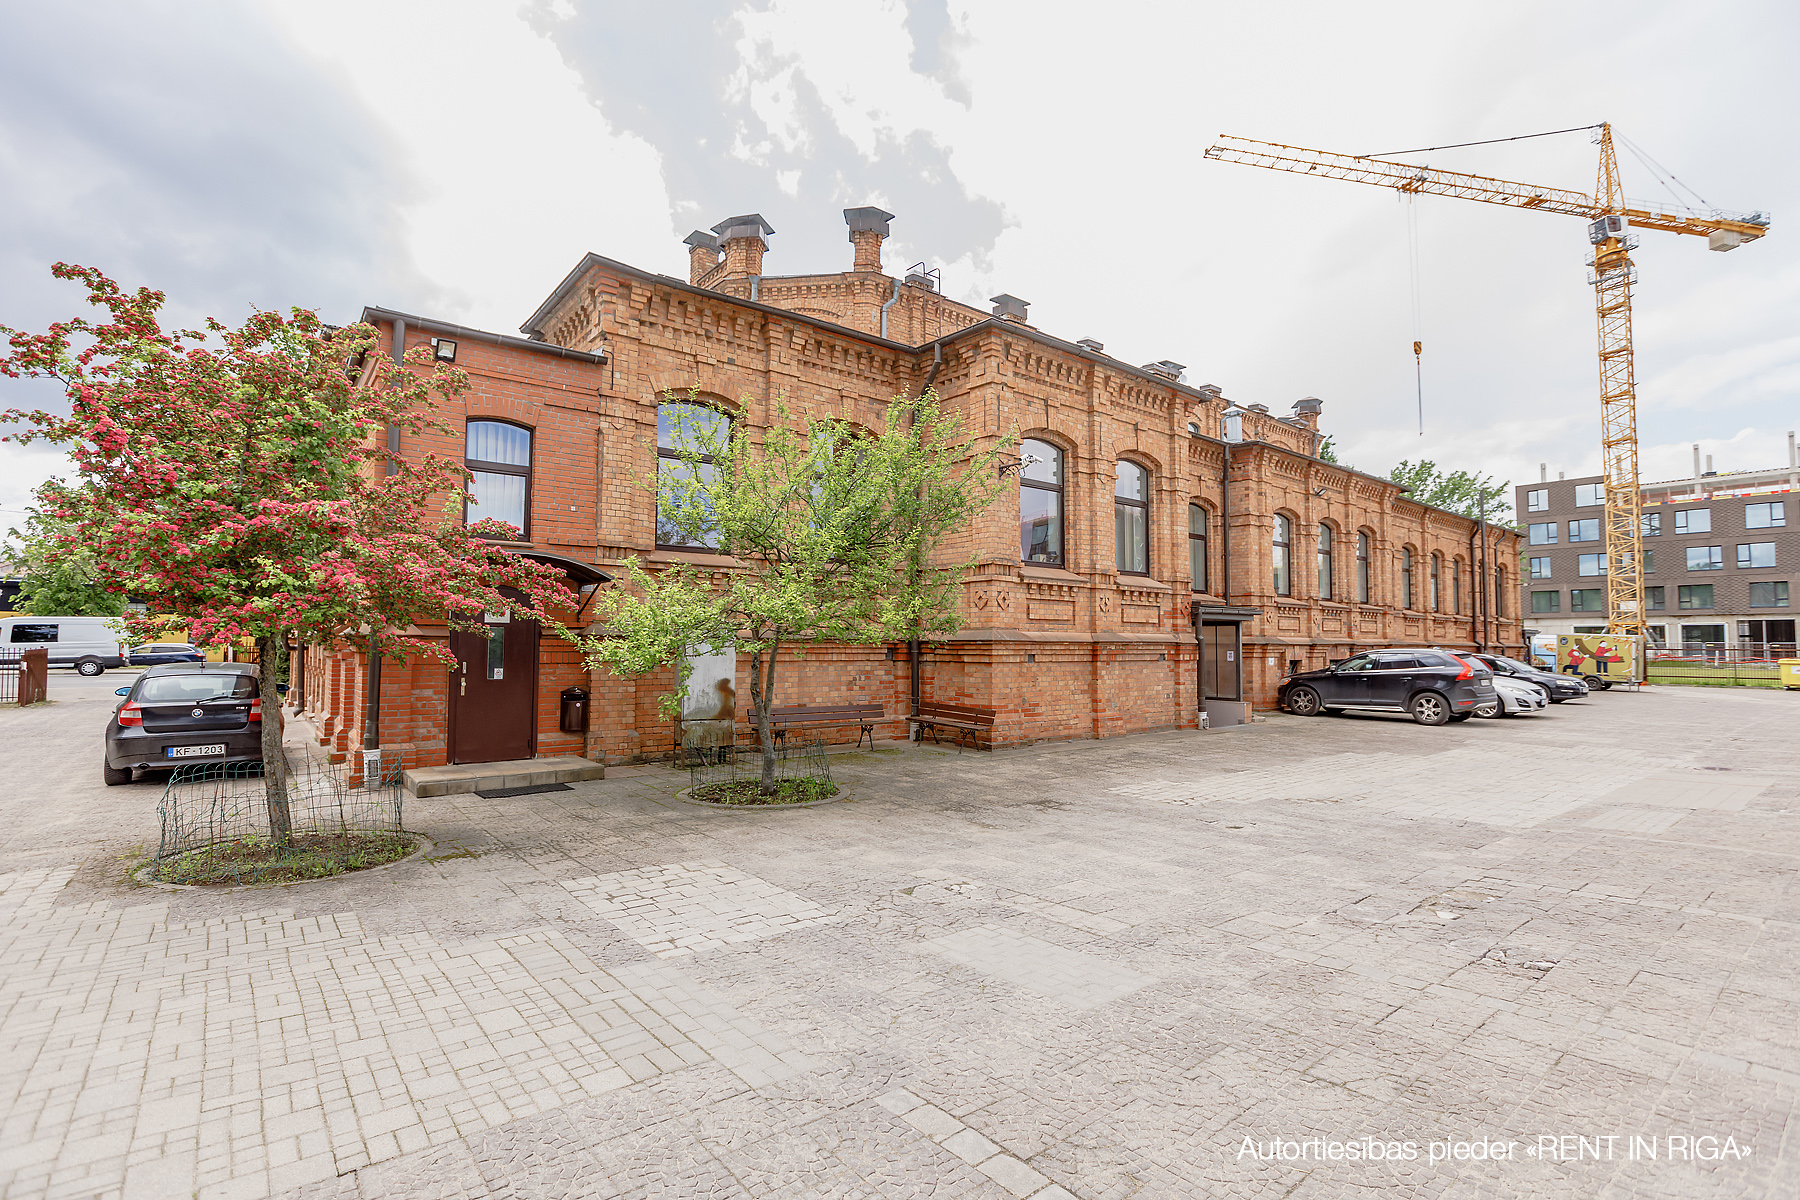 Property building for sale, Hanzas street - Image 1